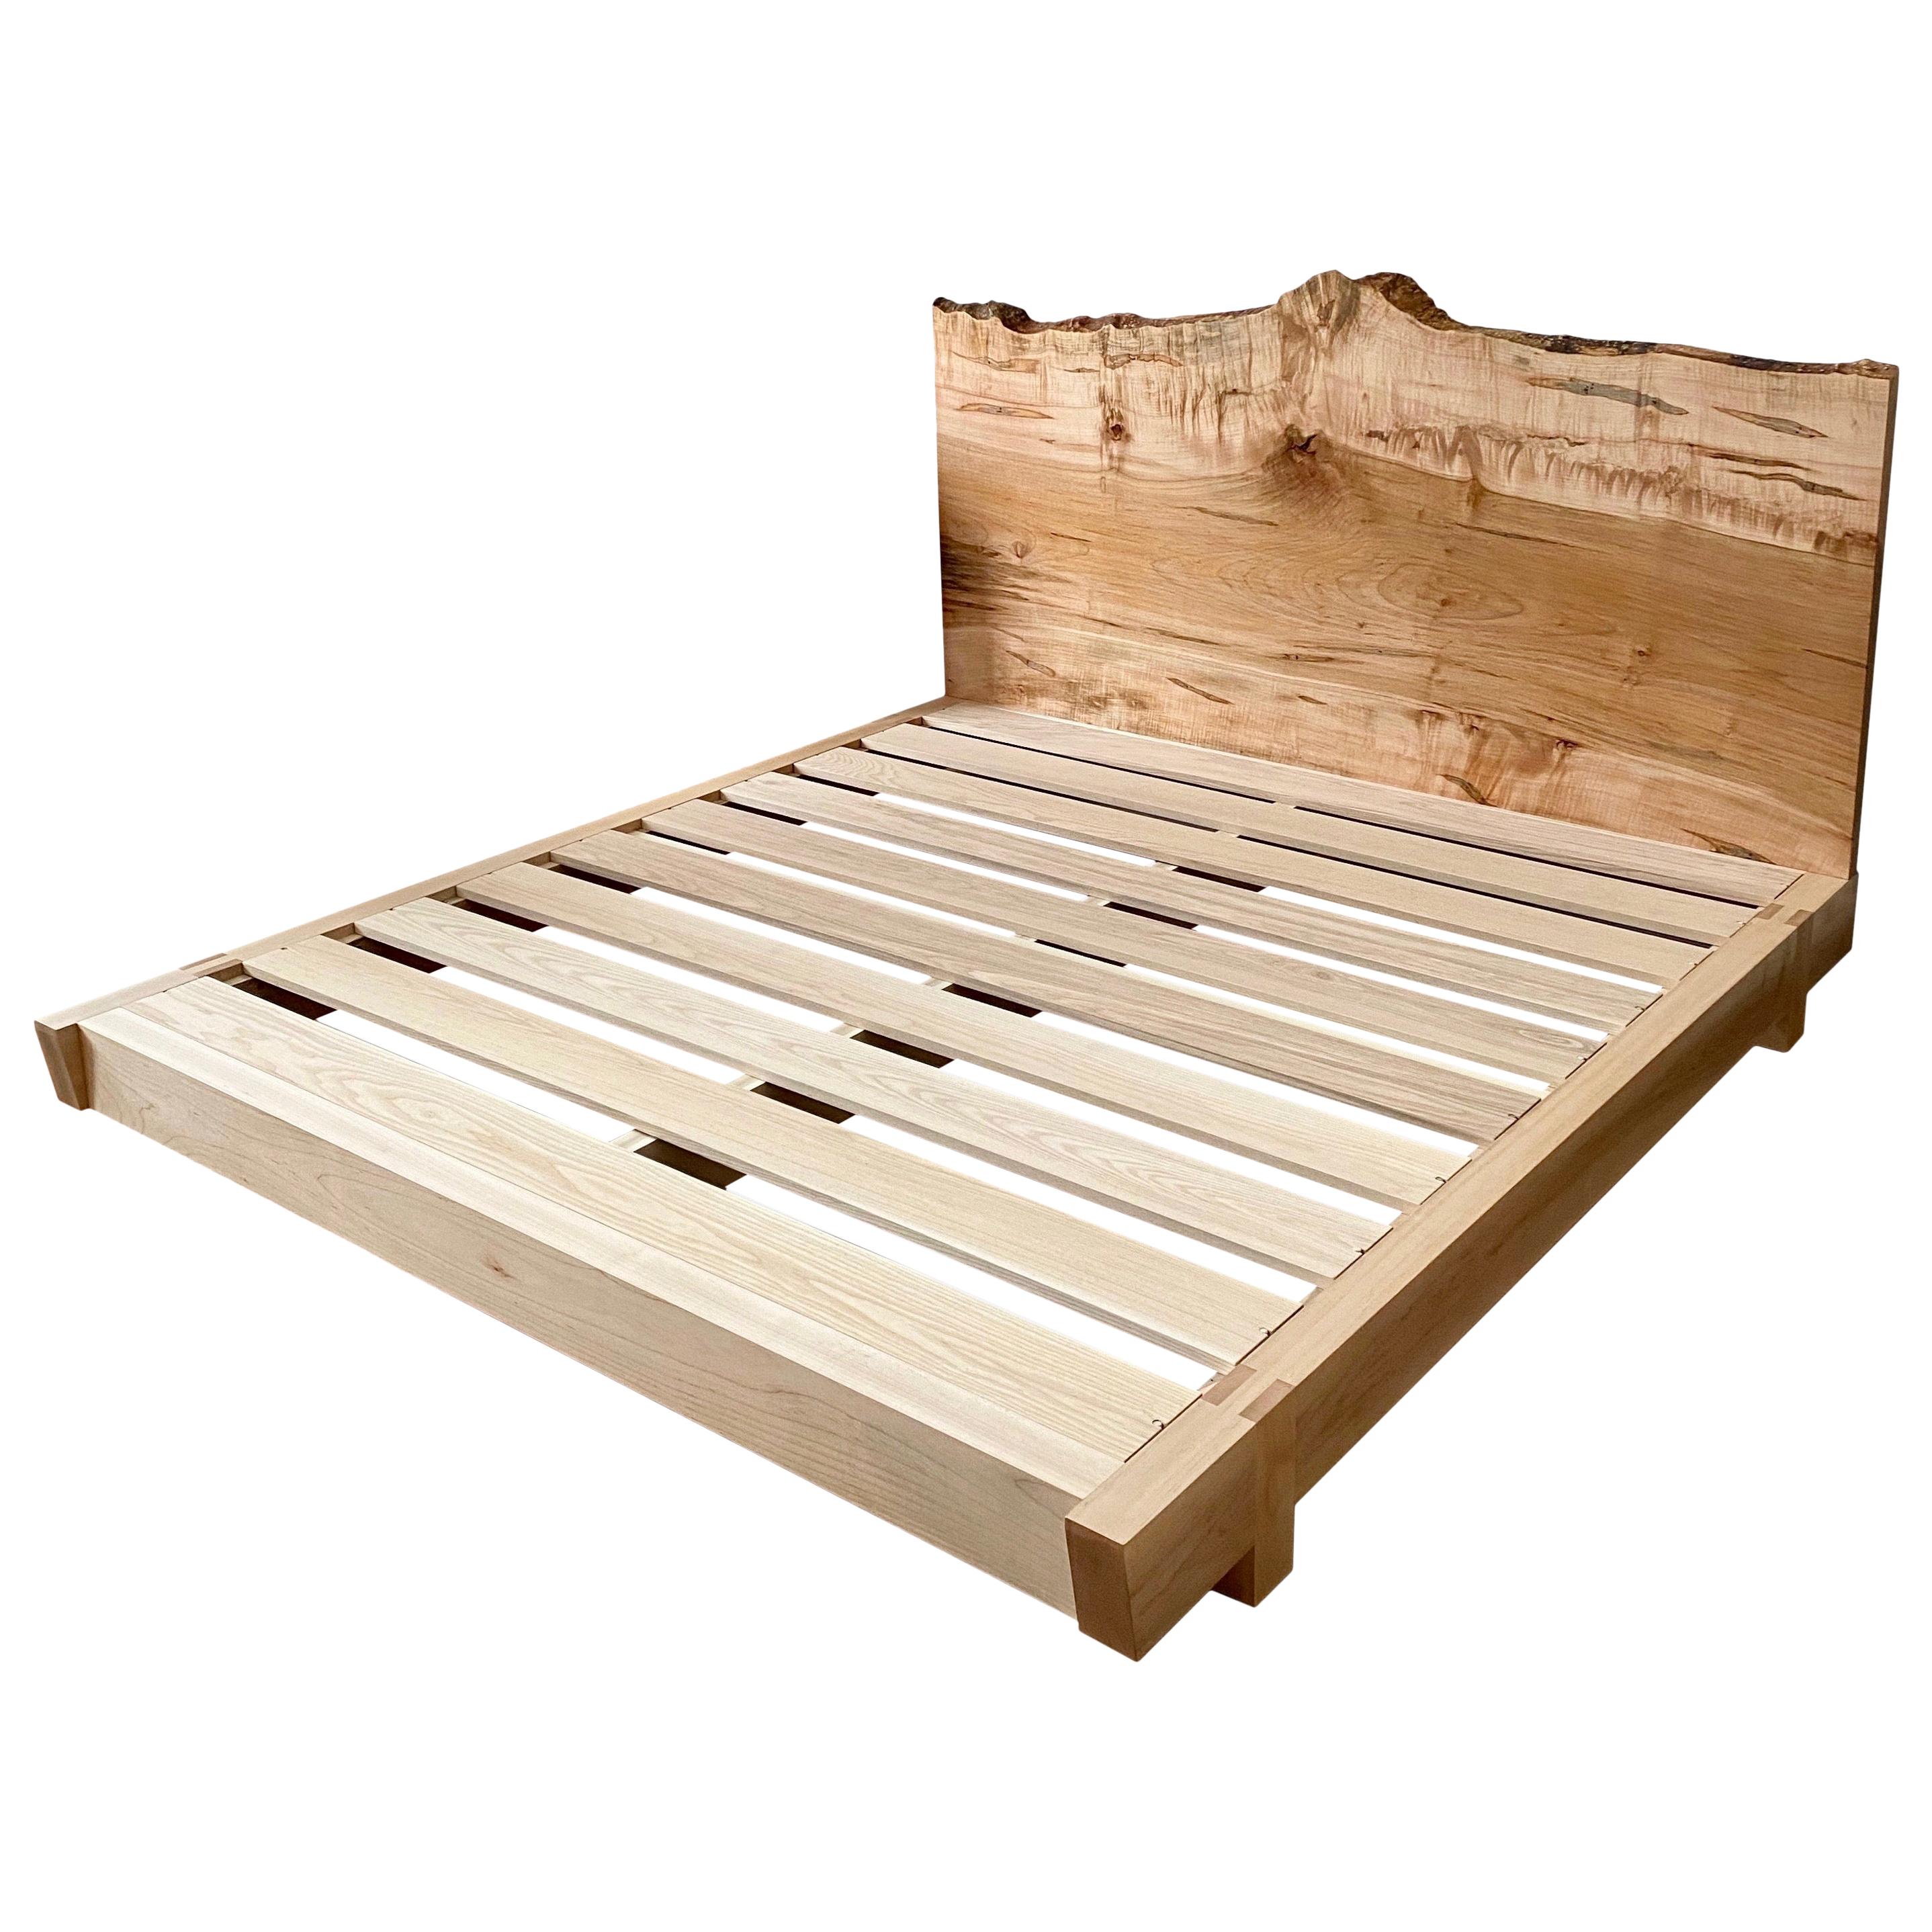 Ambrosia Maple King Sized Perri Bed, Maple King Size Bed Frame